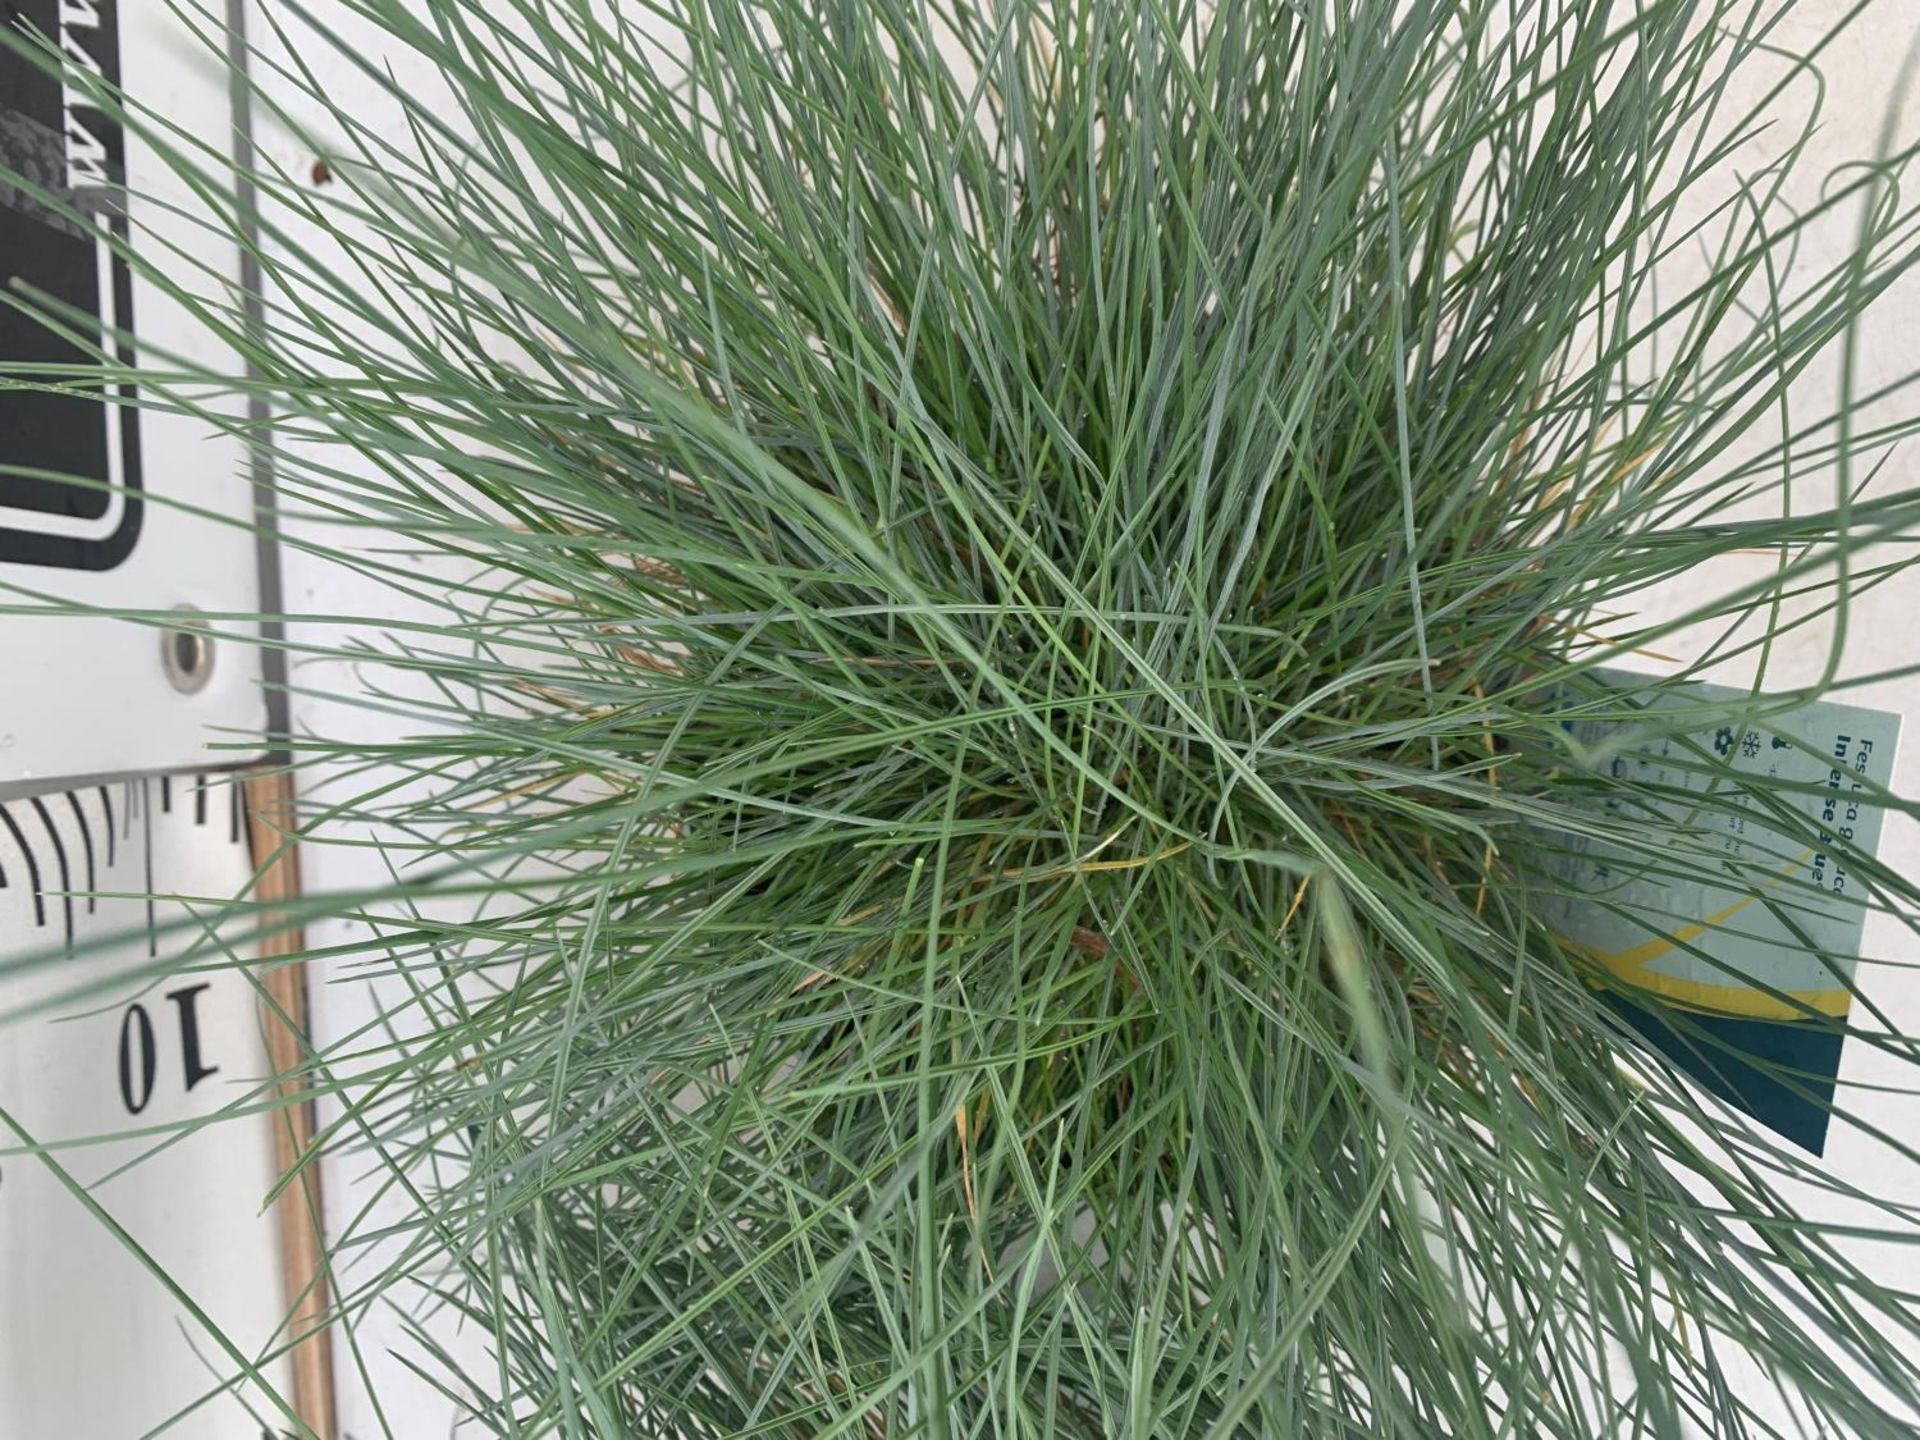 TWO FESTUCA GLAUCA 'INTENSE BLUE' ORNAMENTAL GRASSES IN 2 LTR POTS APPROX 35CM IN HEIGHT PLUS VAT TO - Image 3 of 4